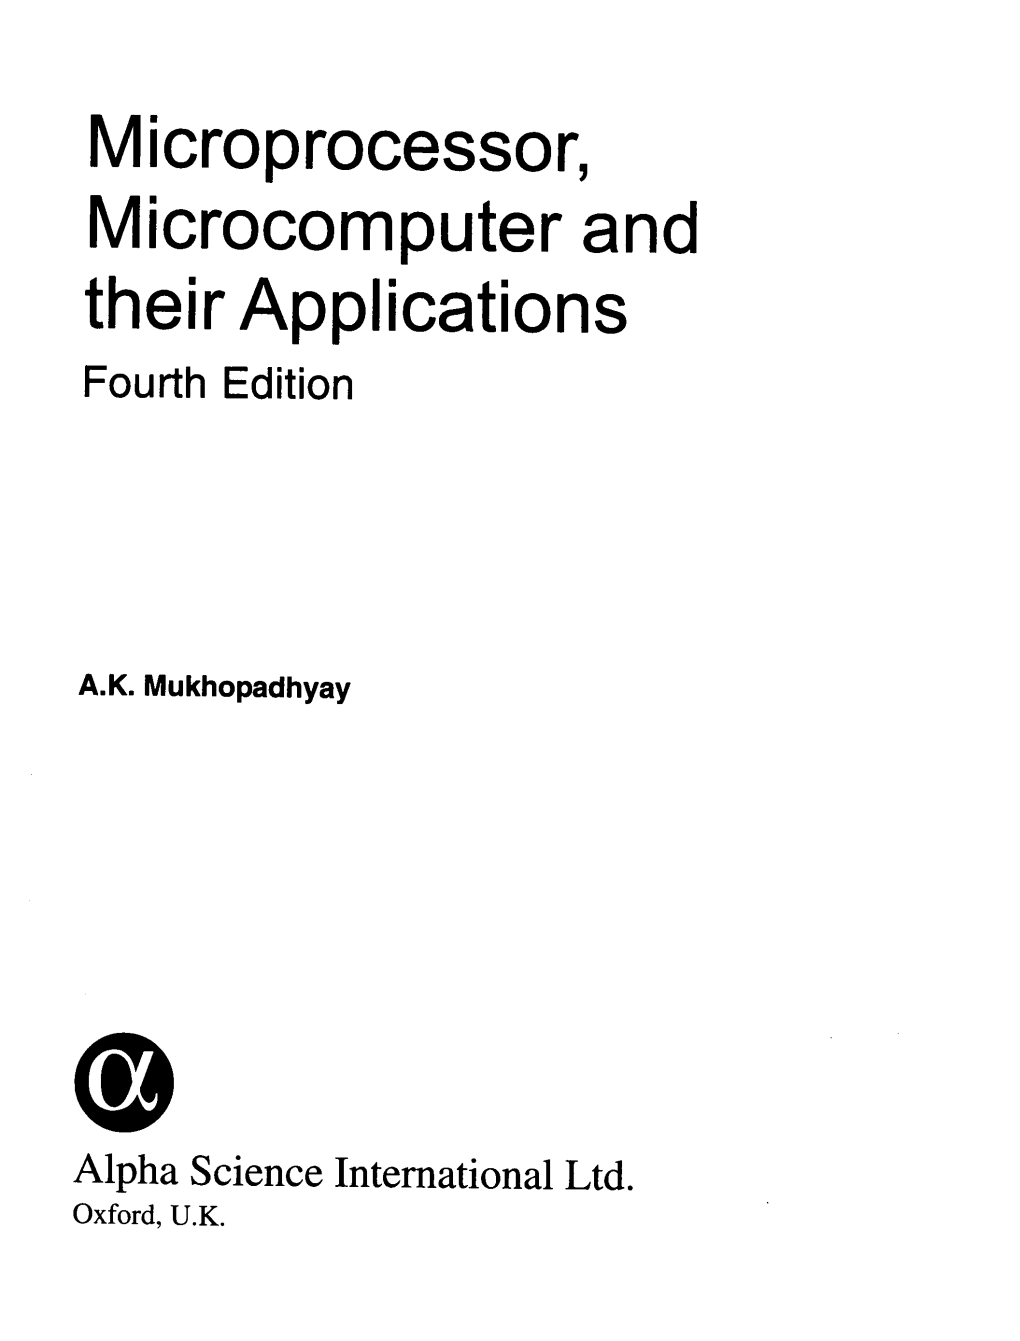 Microprocessor, Microcomputer and Their Applications Fourth Edition